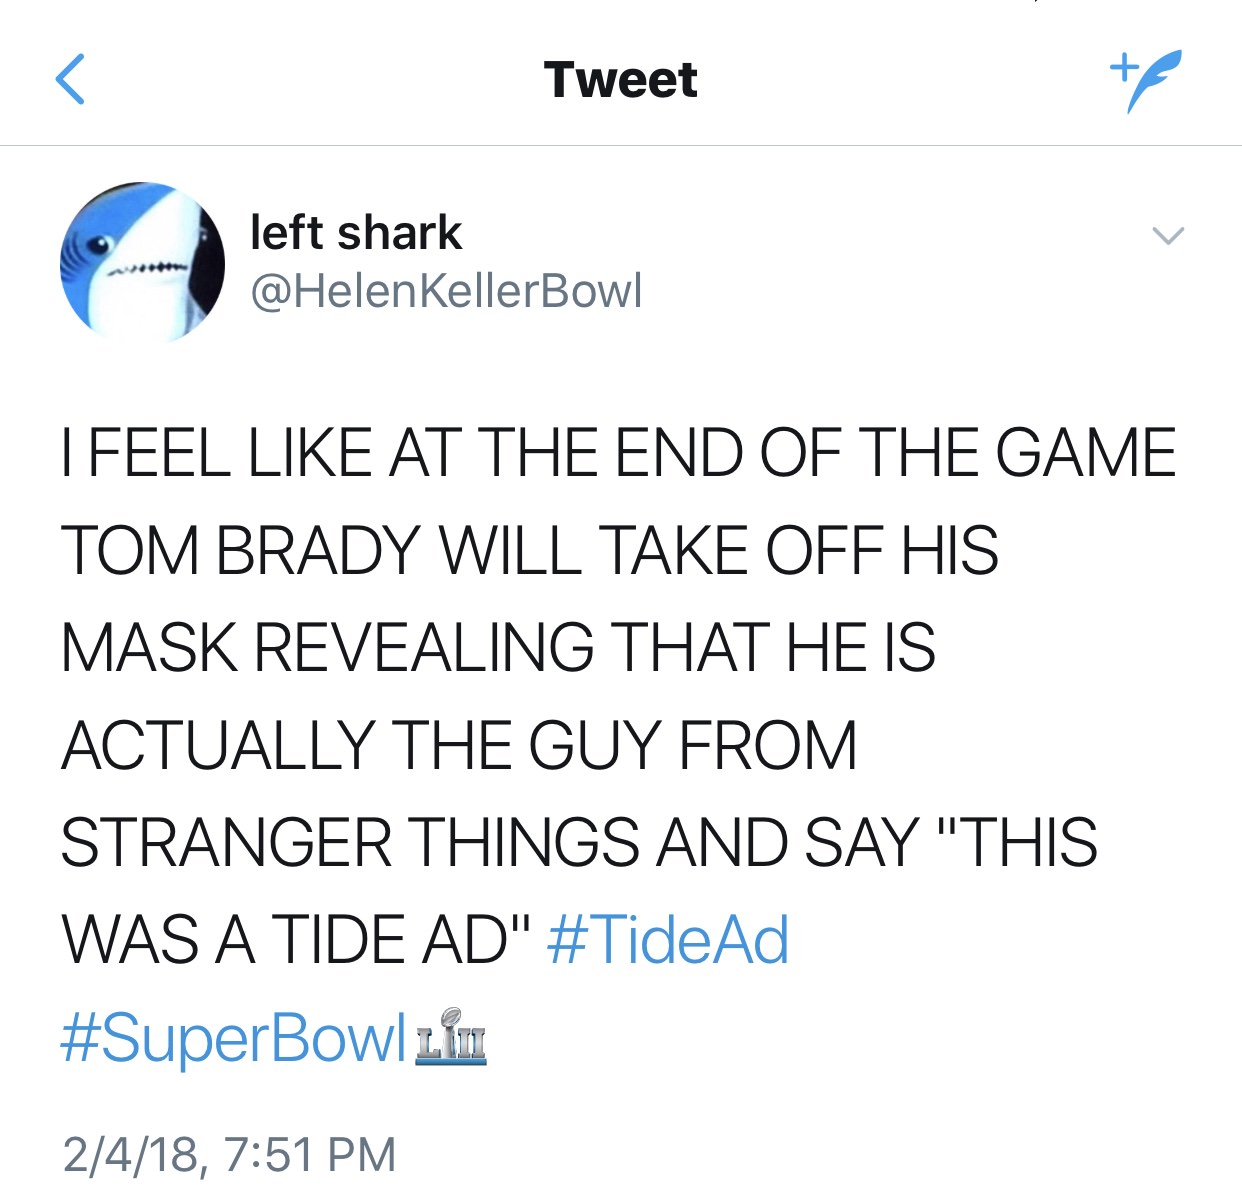 angle - Tweet left shark KellerBowl Lfeel At The End Of The Game Tom Brady Will Take Off His Mask Revealing That He Is Actually The Guy From Stranger Things And Say "This Was A Tide Ad" Ad 2.1m 2418,